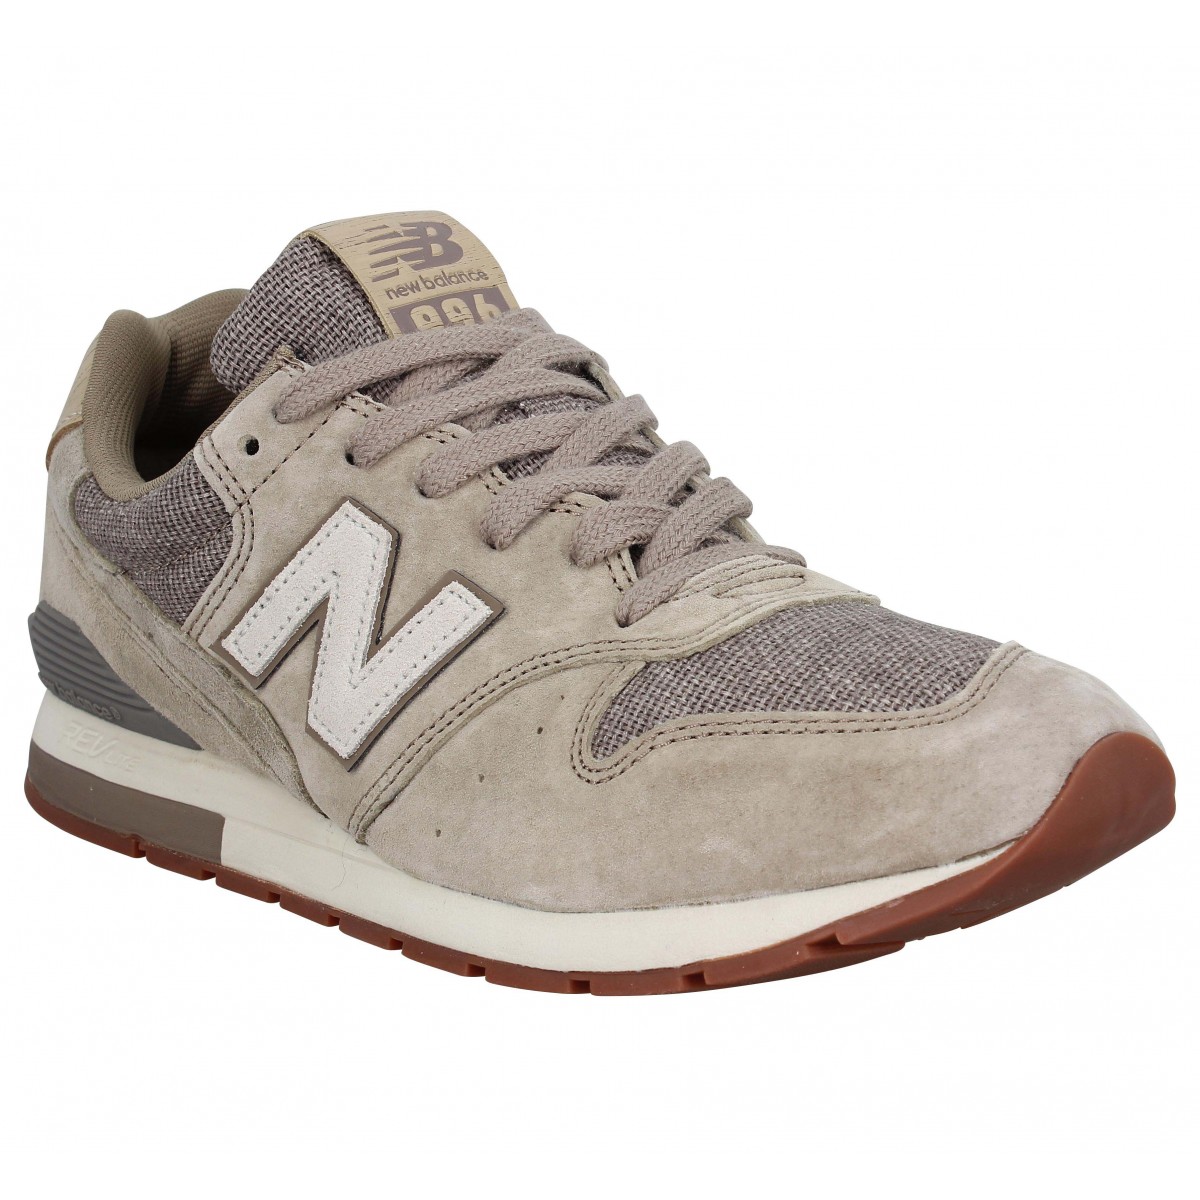 New balance mrl 996 velours toile homme taupe homme | chaussures